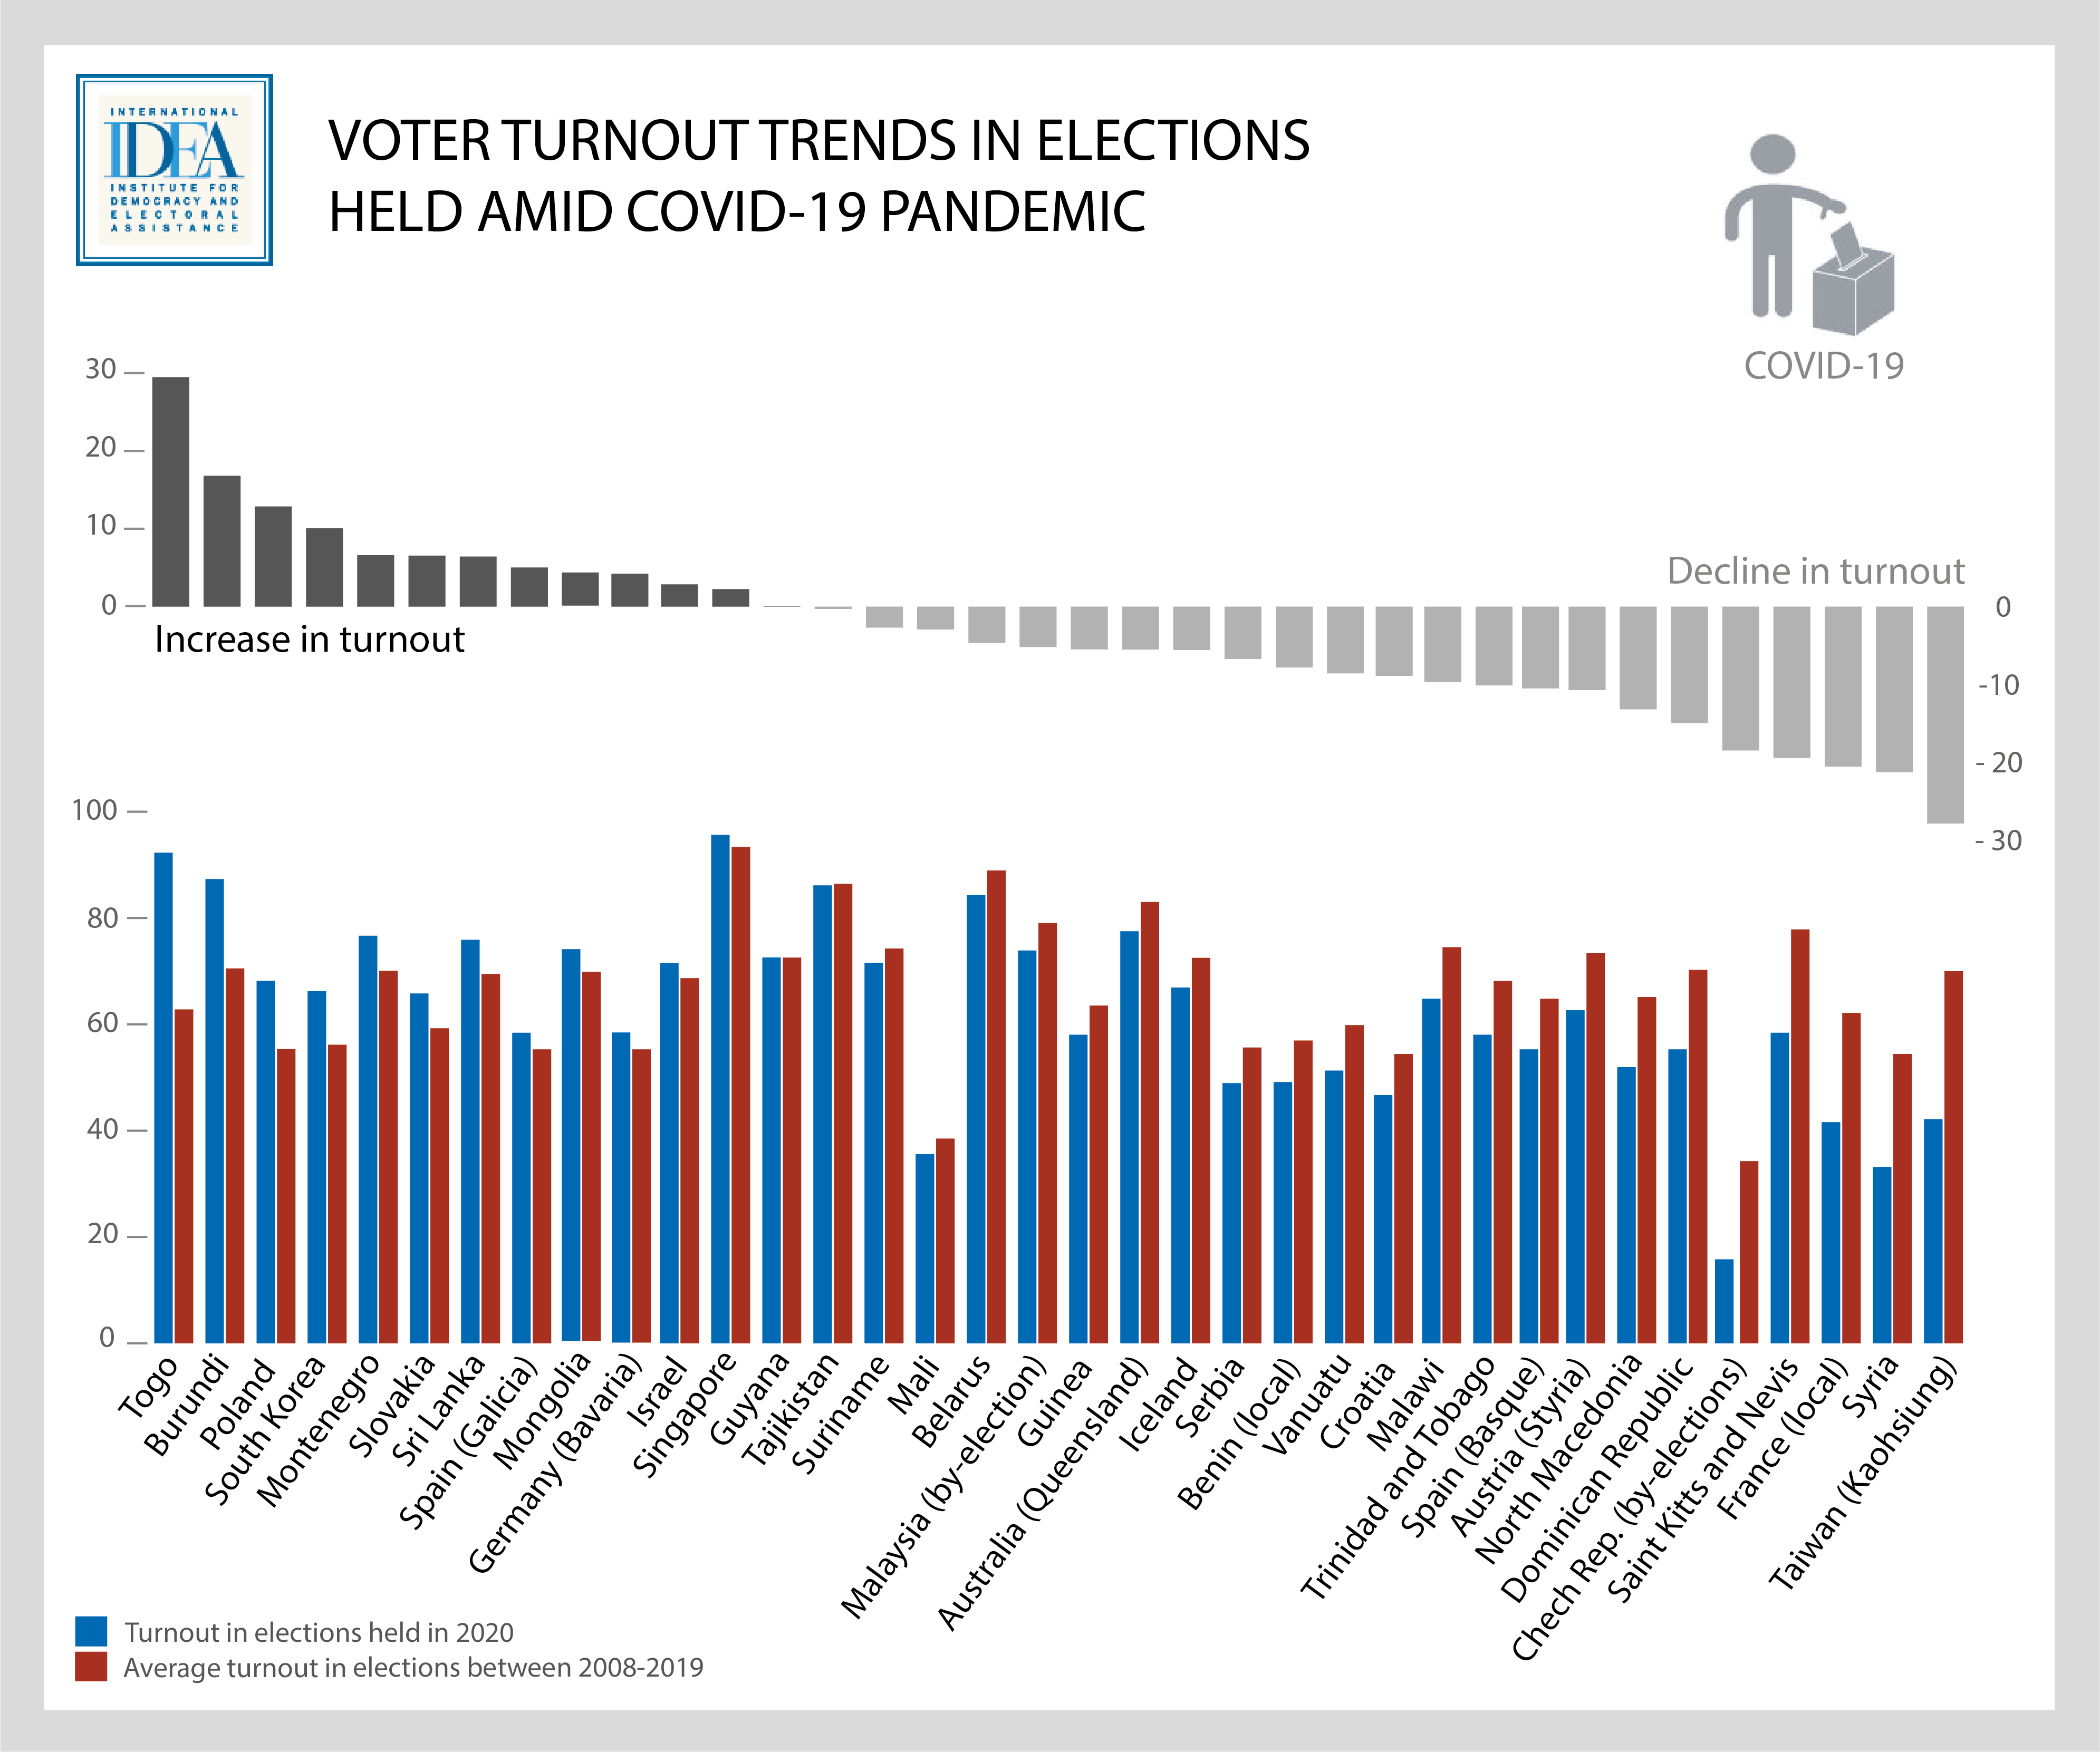 Going against the trend elections with increased voter turnout during